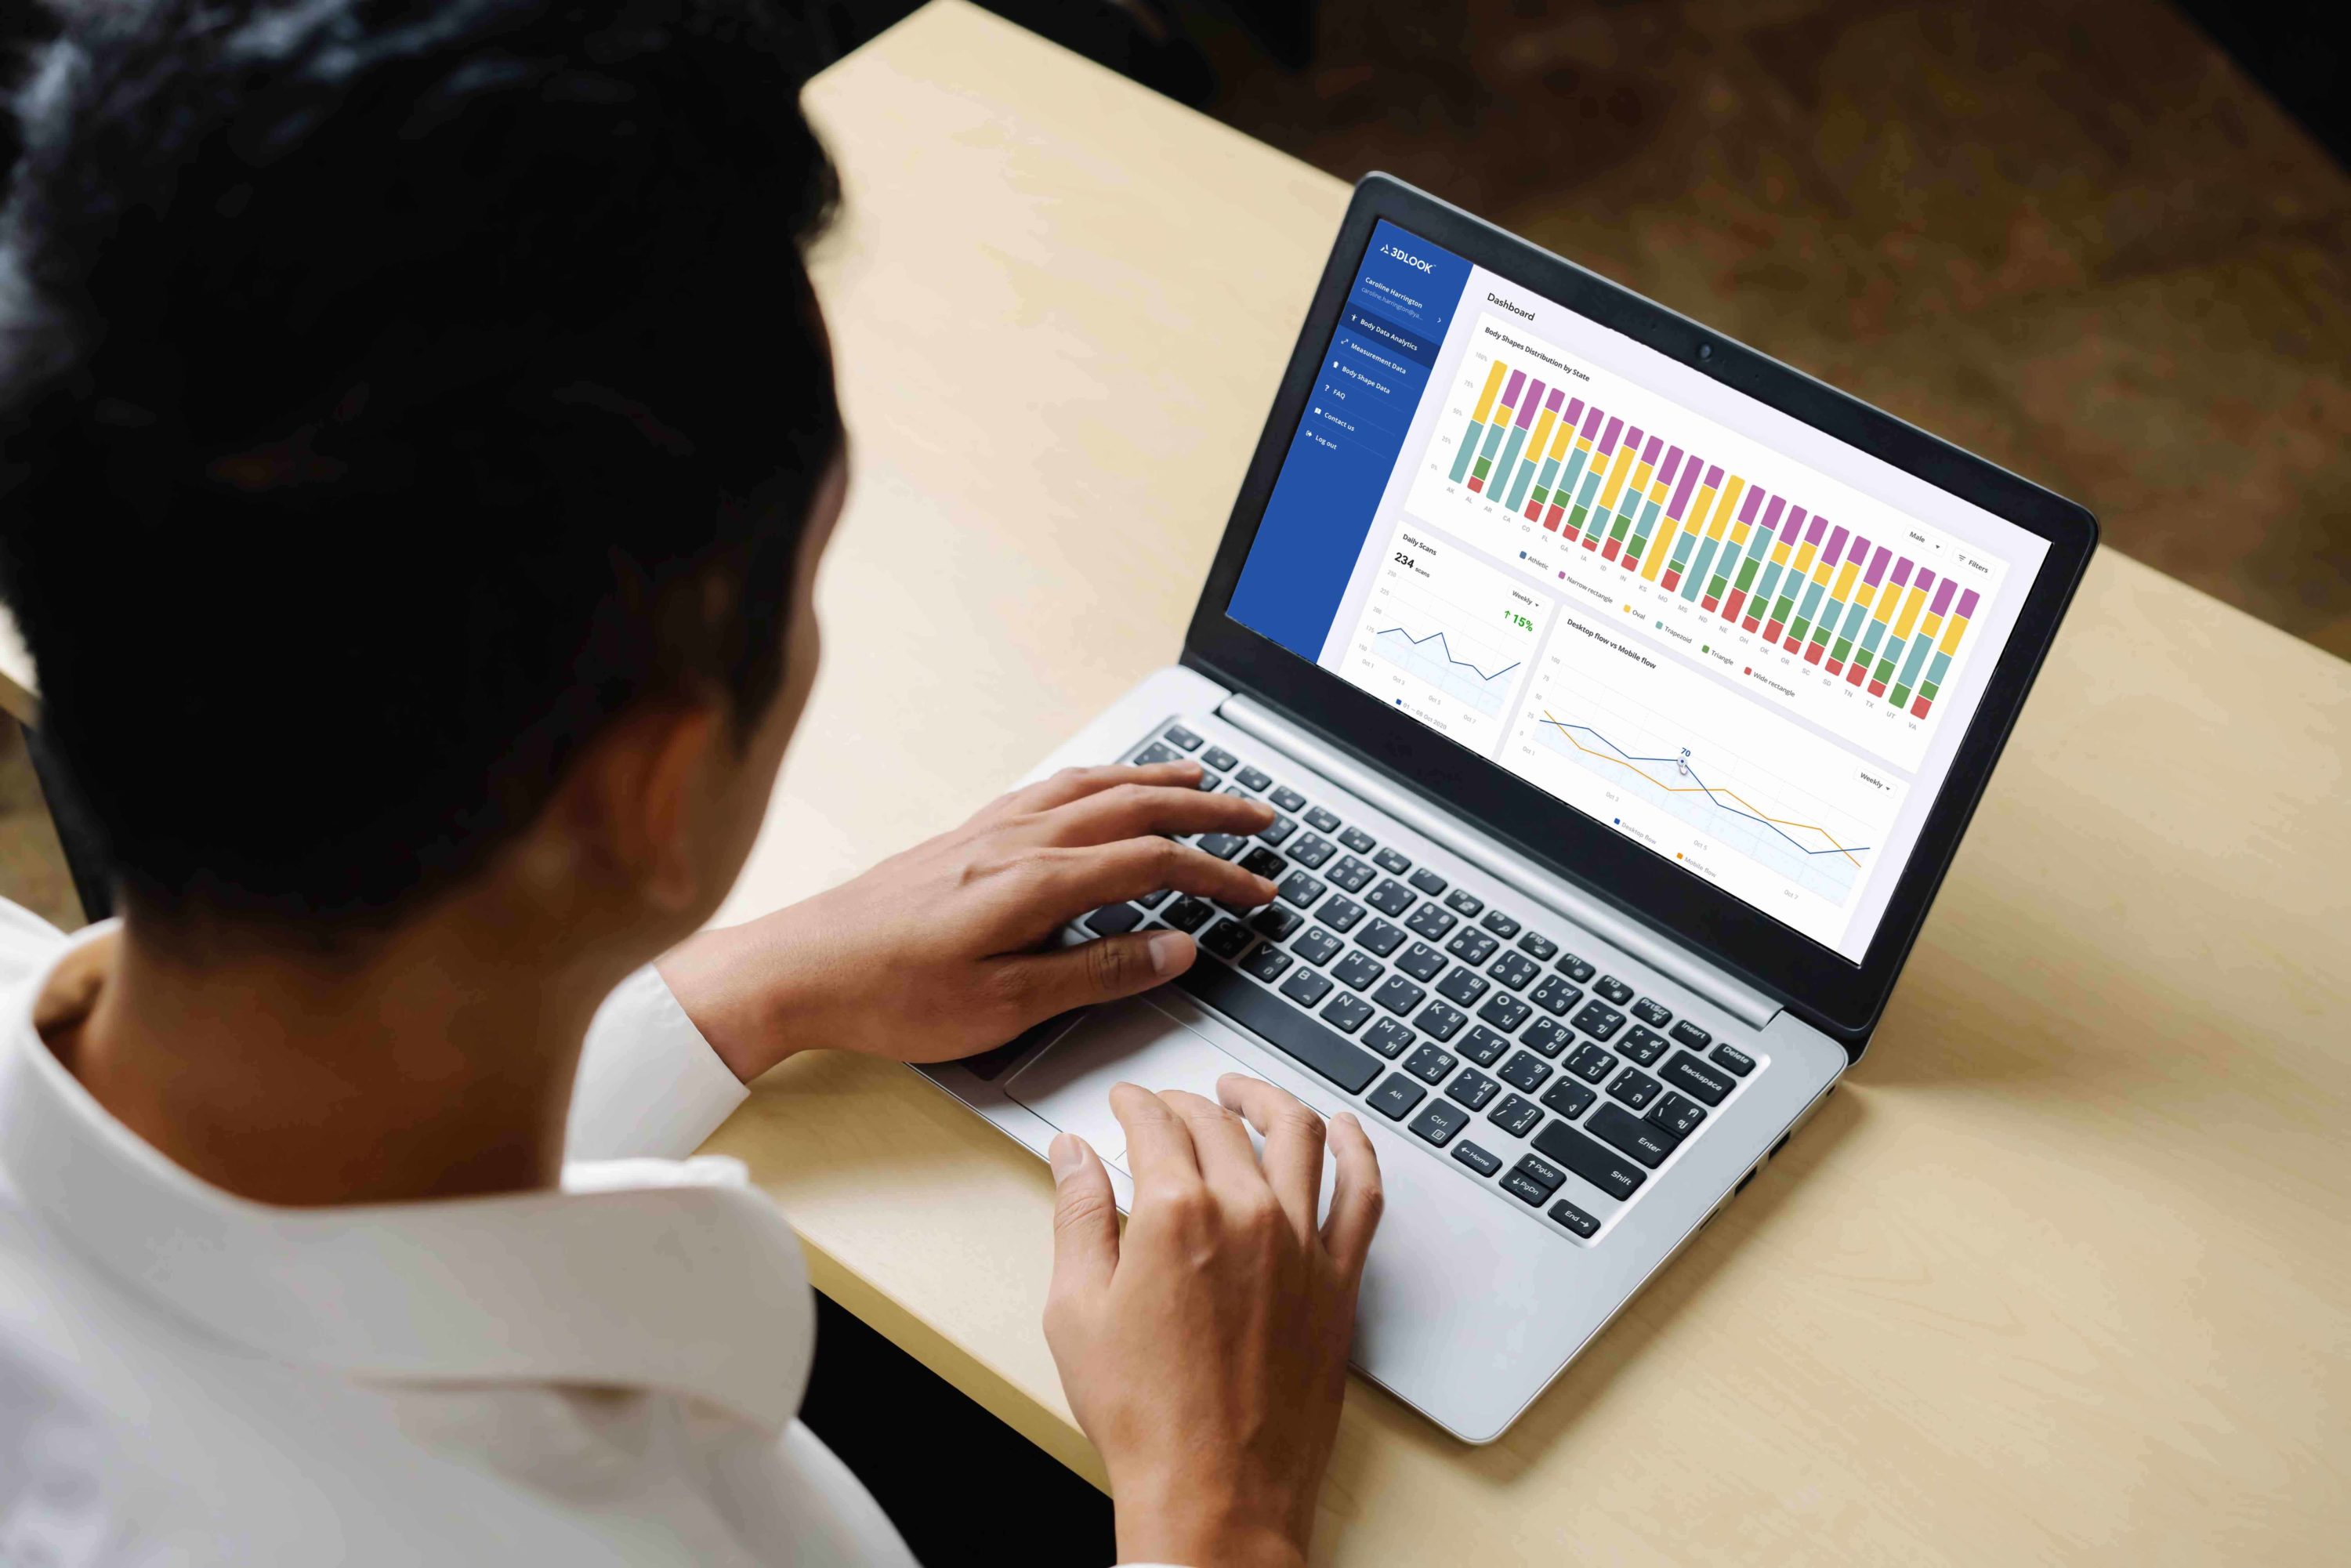 A man using a laptop with analytics graph displayed.